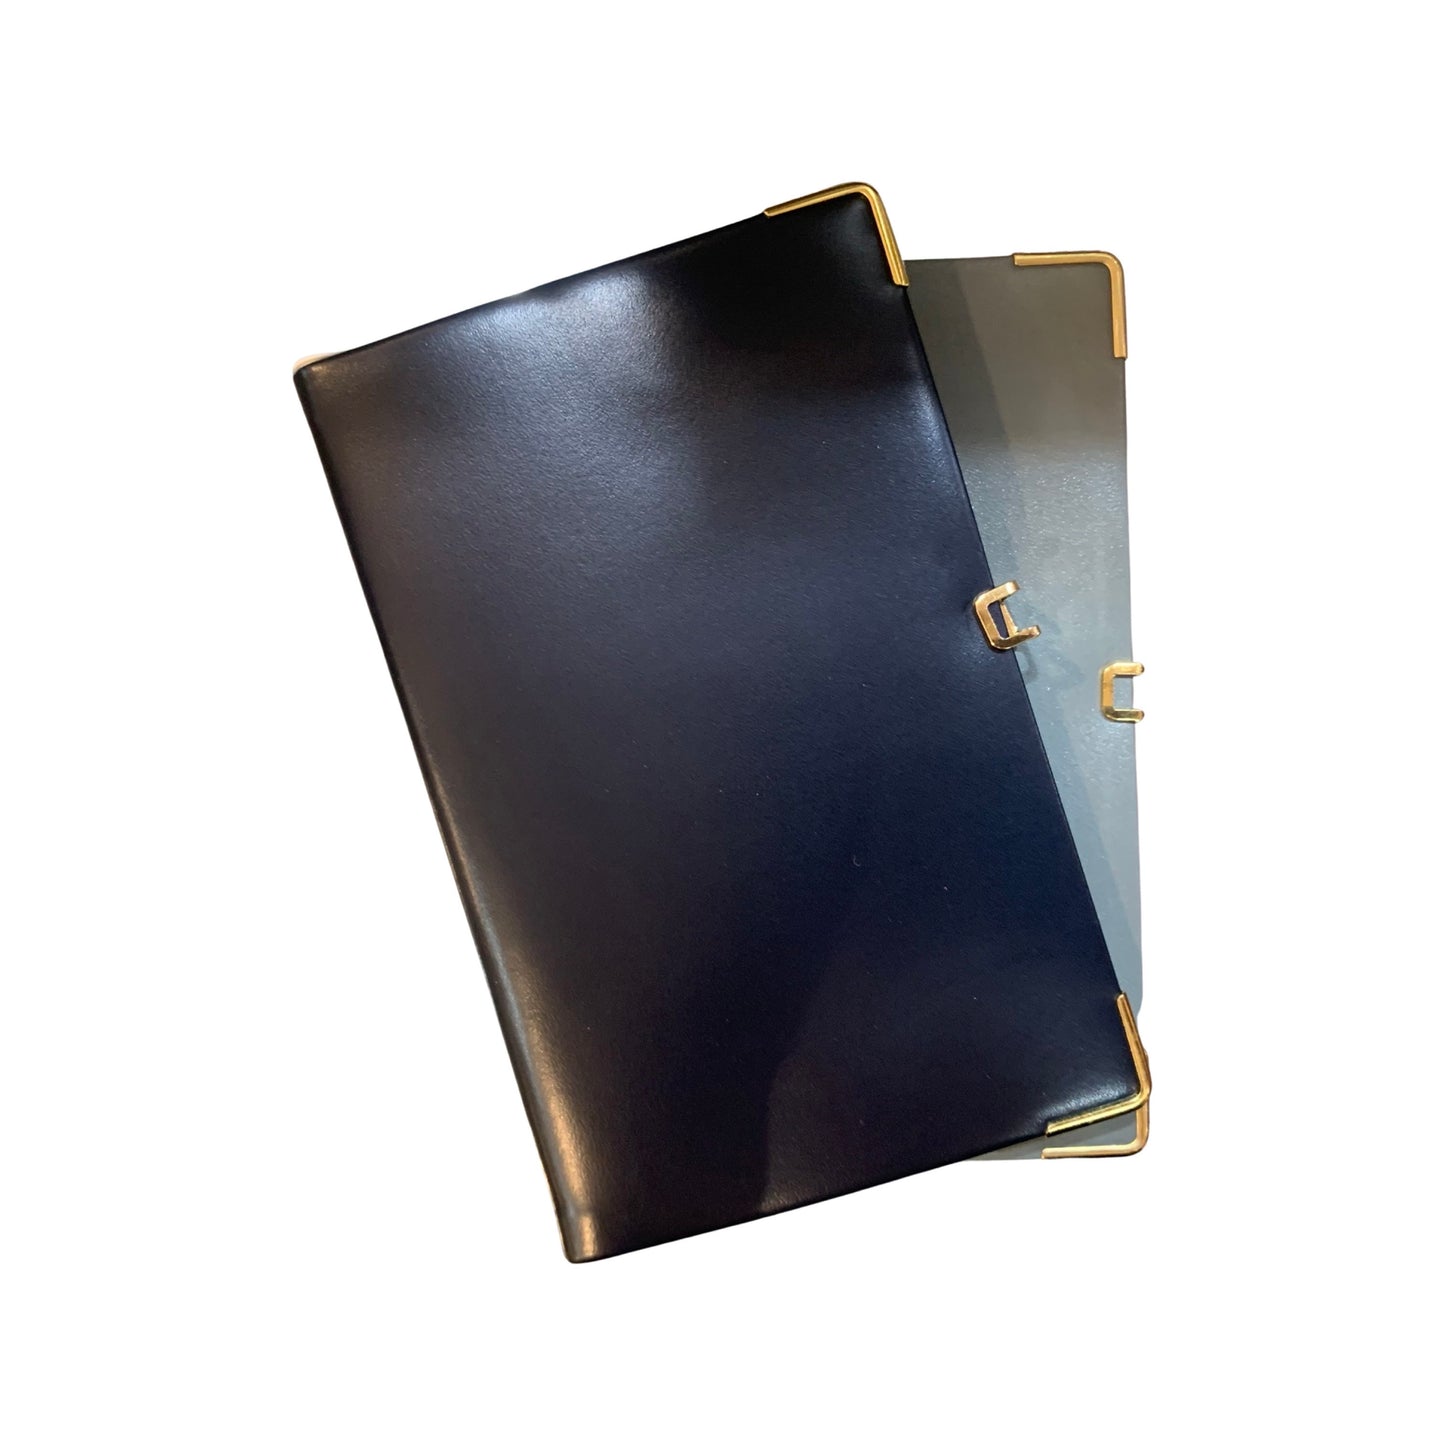 Address Passwords Book | 5 by 3 inches | Calf Leather | Gold Corners | Pencil and Gold Clasp with Gold Corners | A53CJCGC